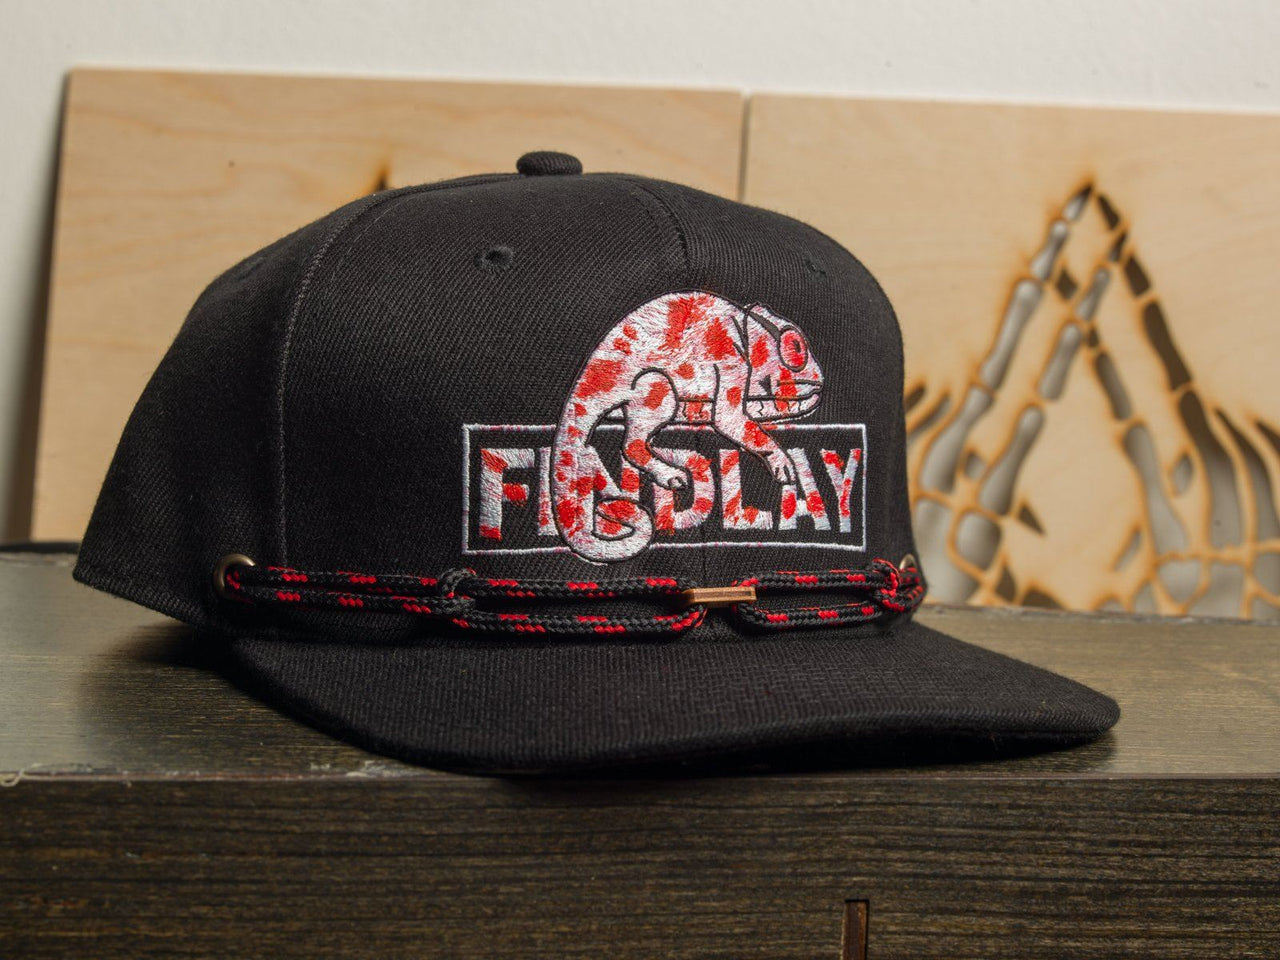 Sneaky Blood Splatter Chameleon (1 of 1 hand painted) Limited Edition Hats Findlay Hats 